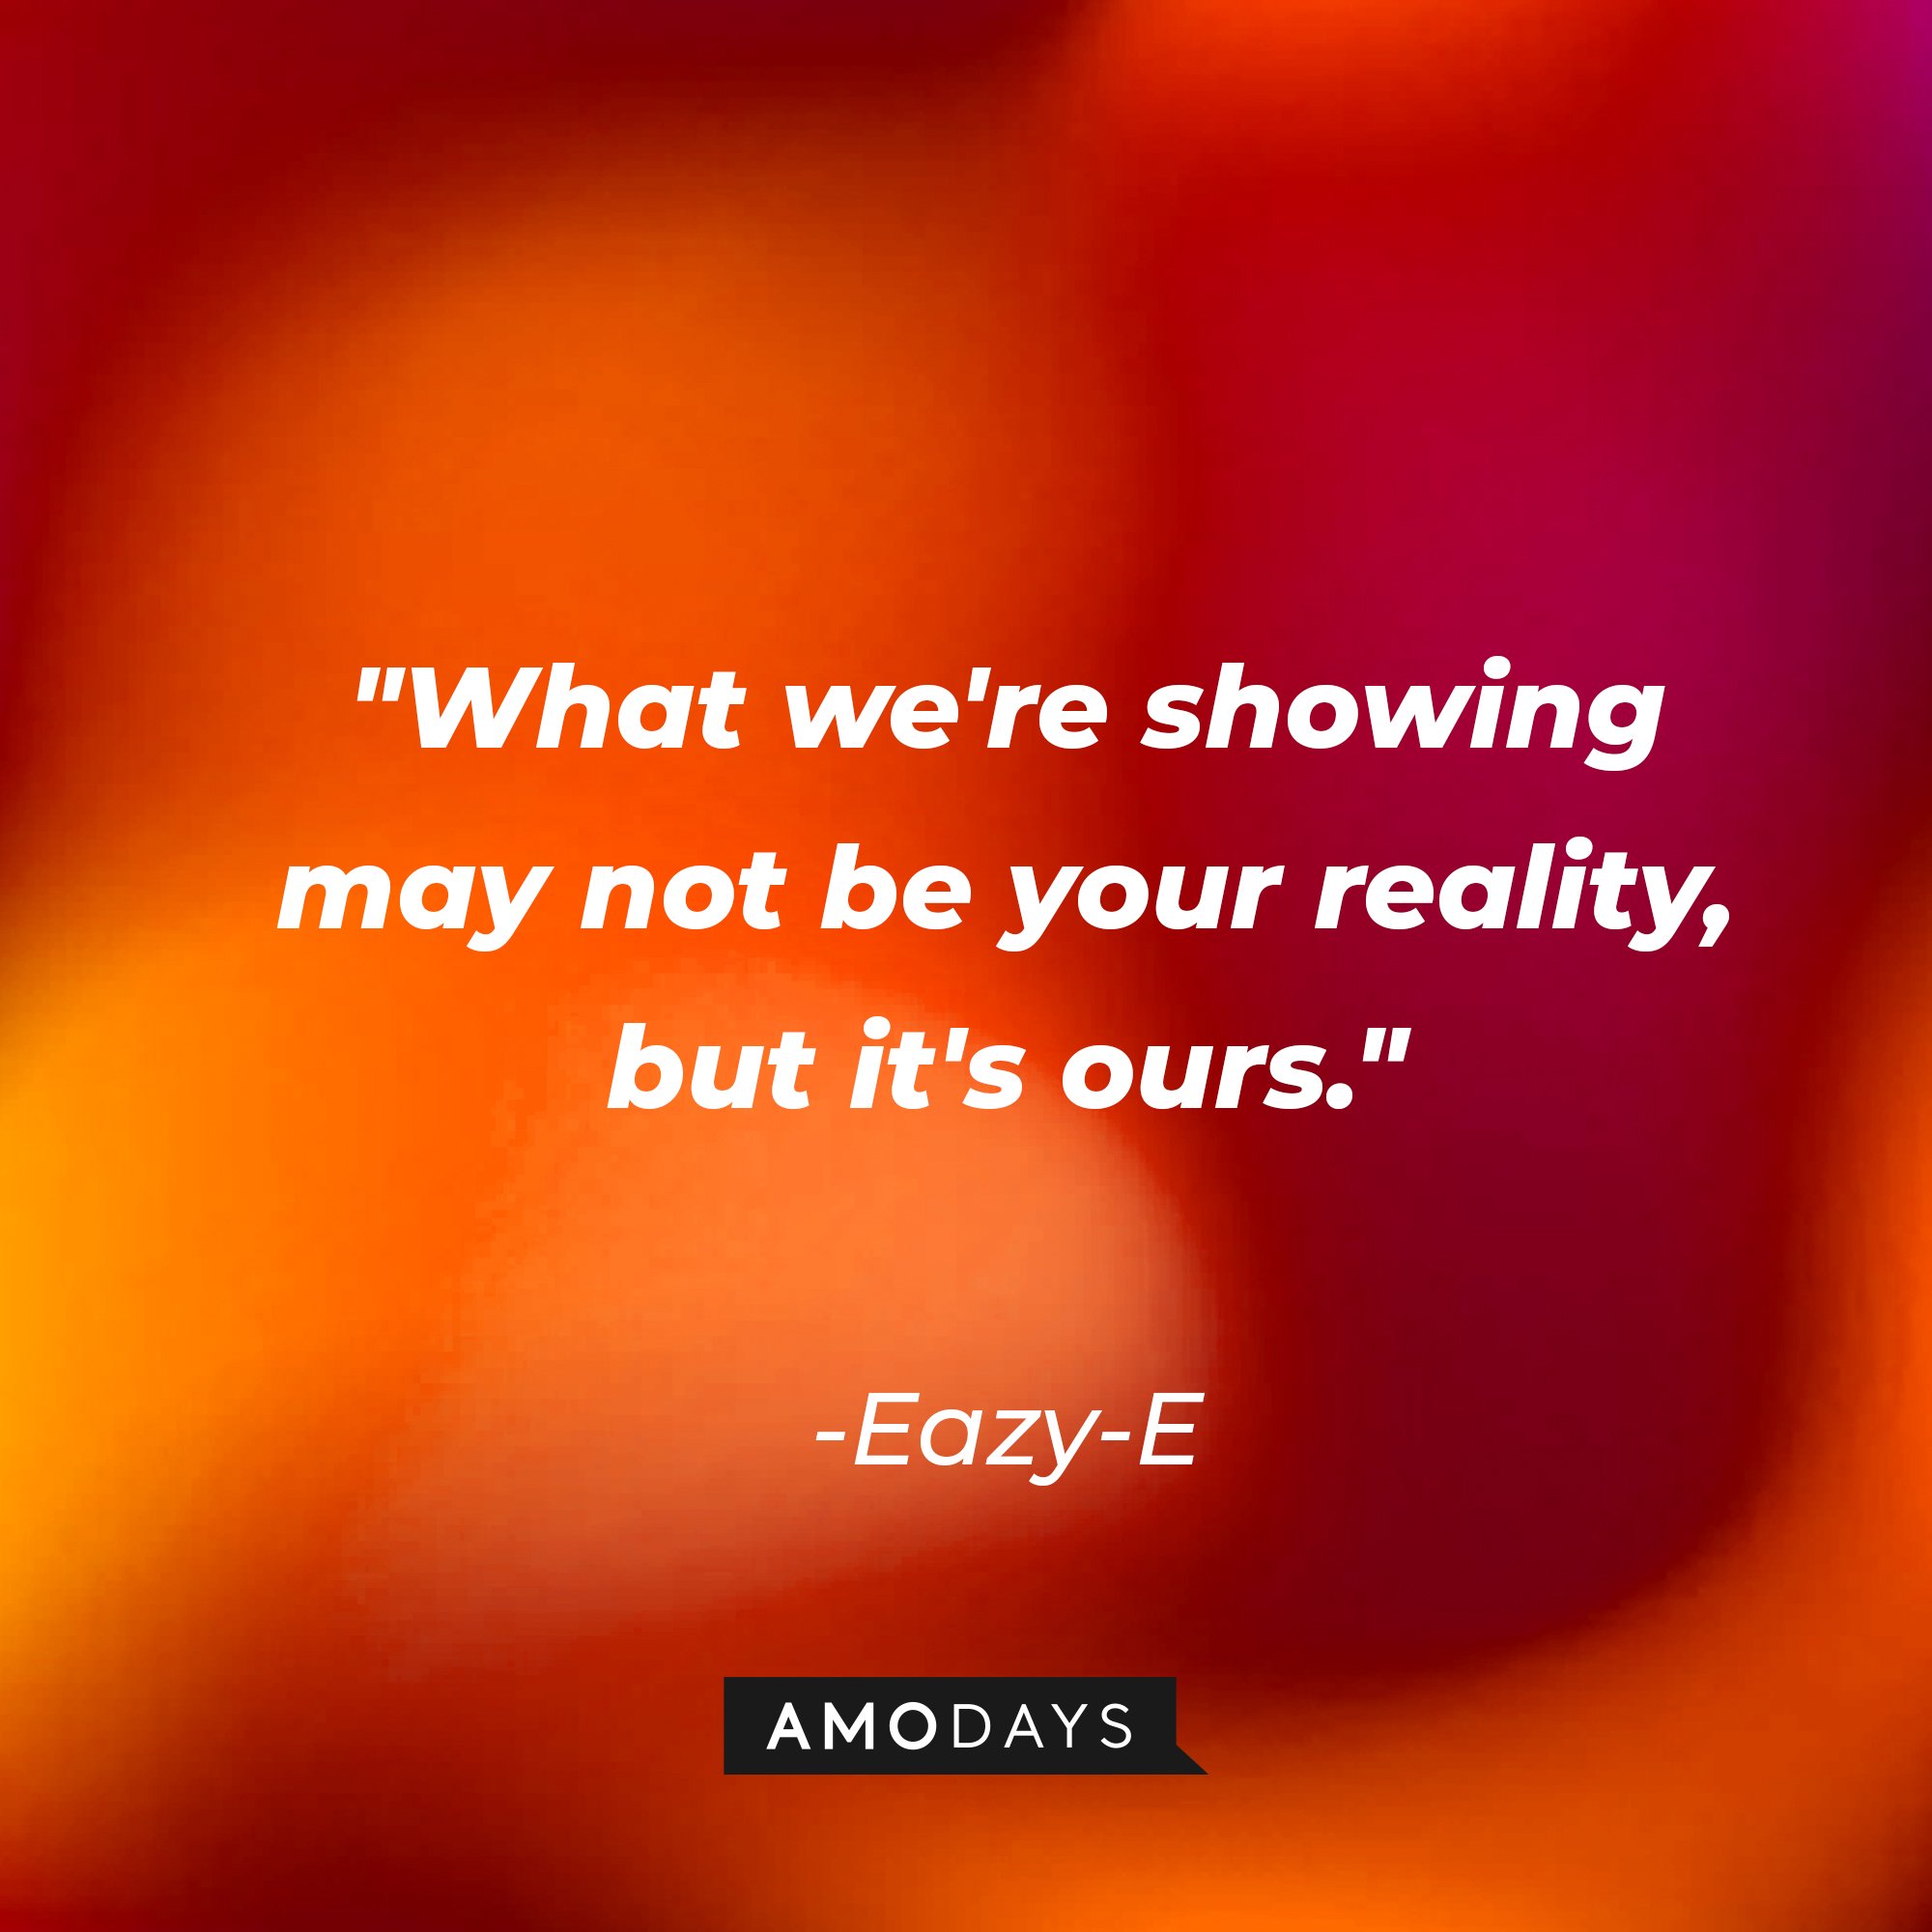 Eazy-E's quote: "What we're showing may not be your reality, but it's ours." | Image: AmoDays